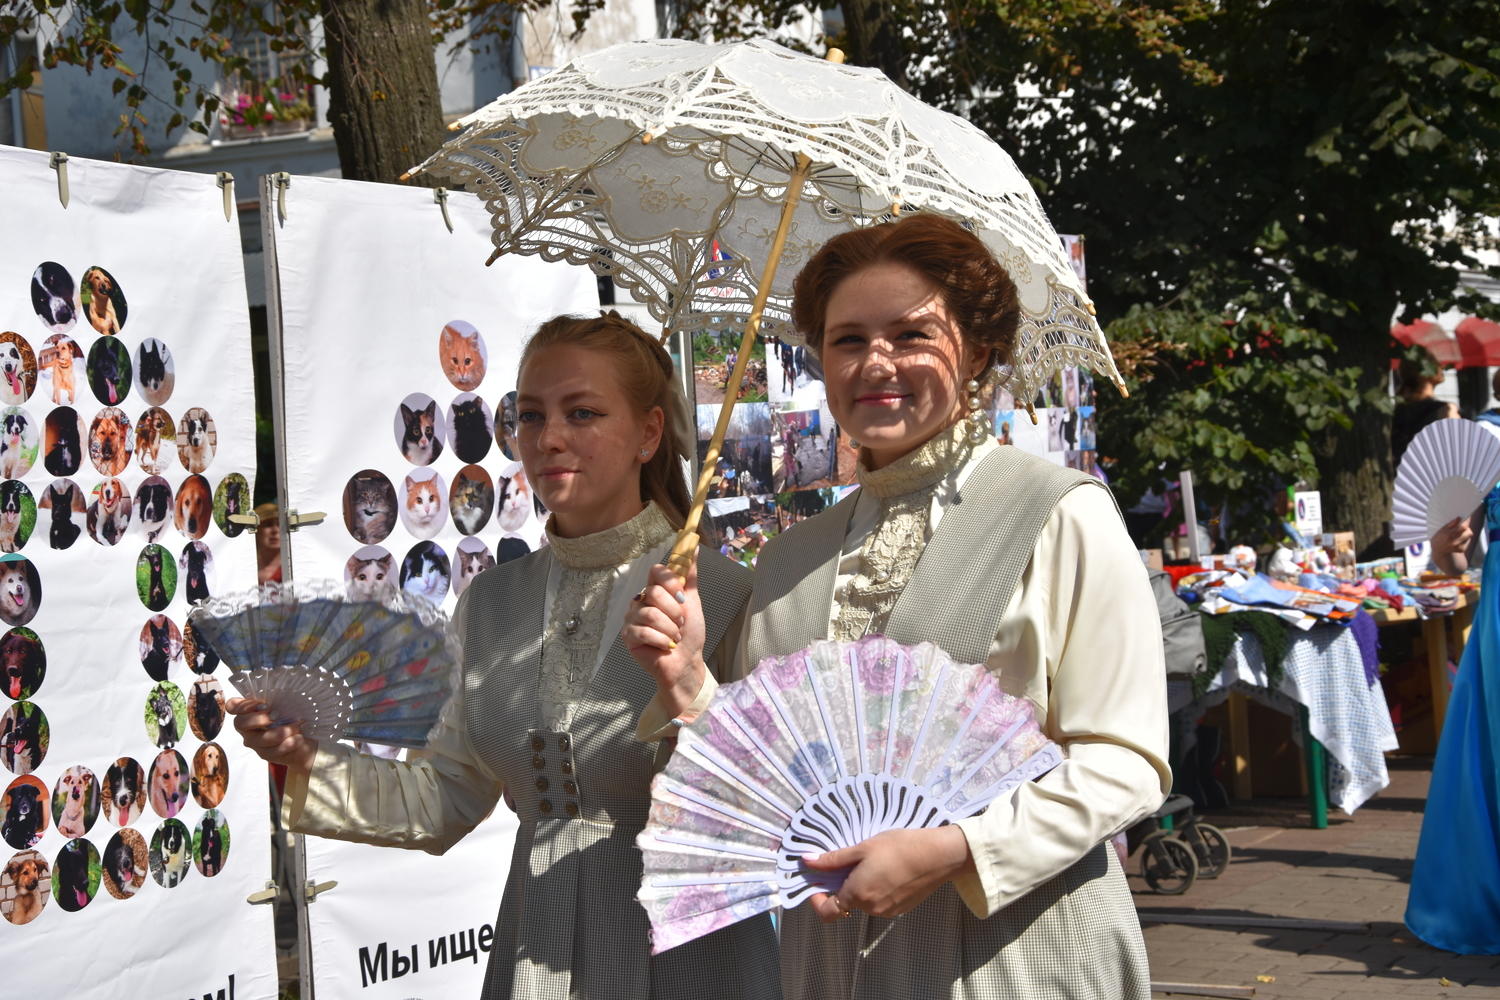 Kostroma celebrated City Day on a grand scale